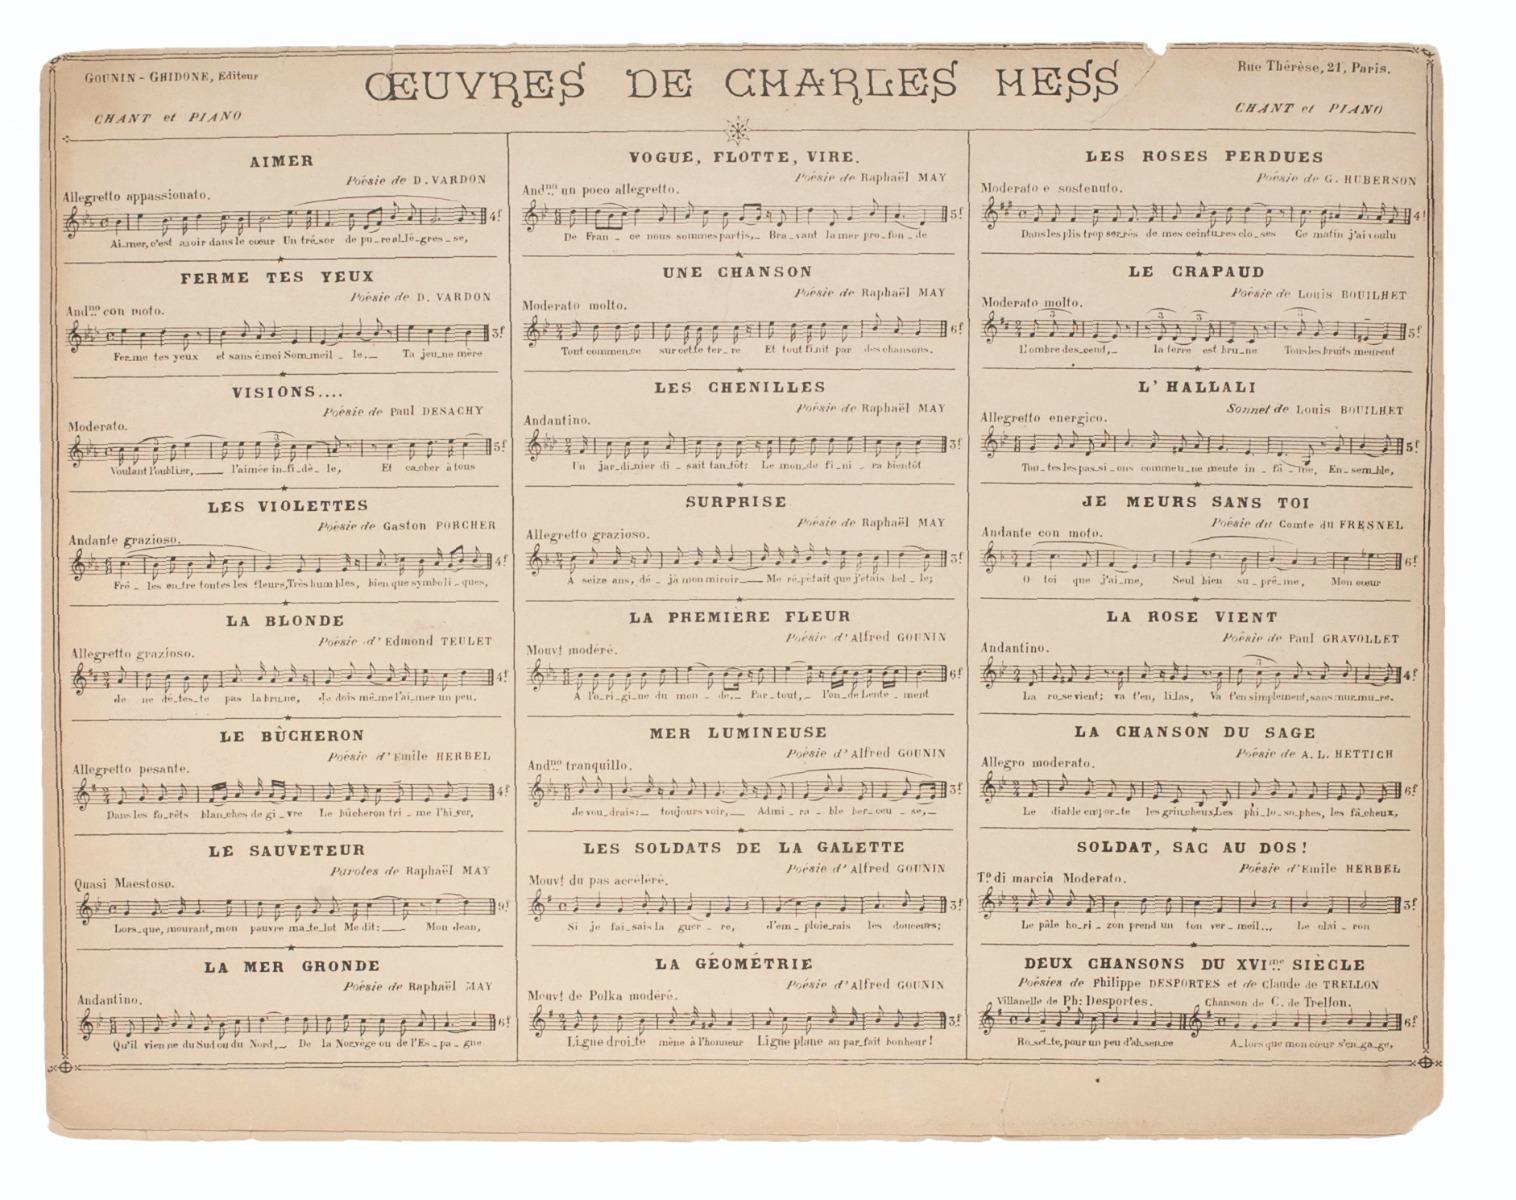 Music and Poetry Program - Original Litograph - 1880 - Print by Unknown